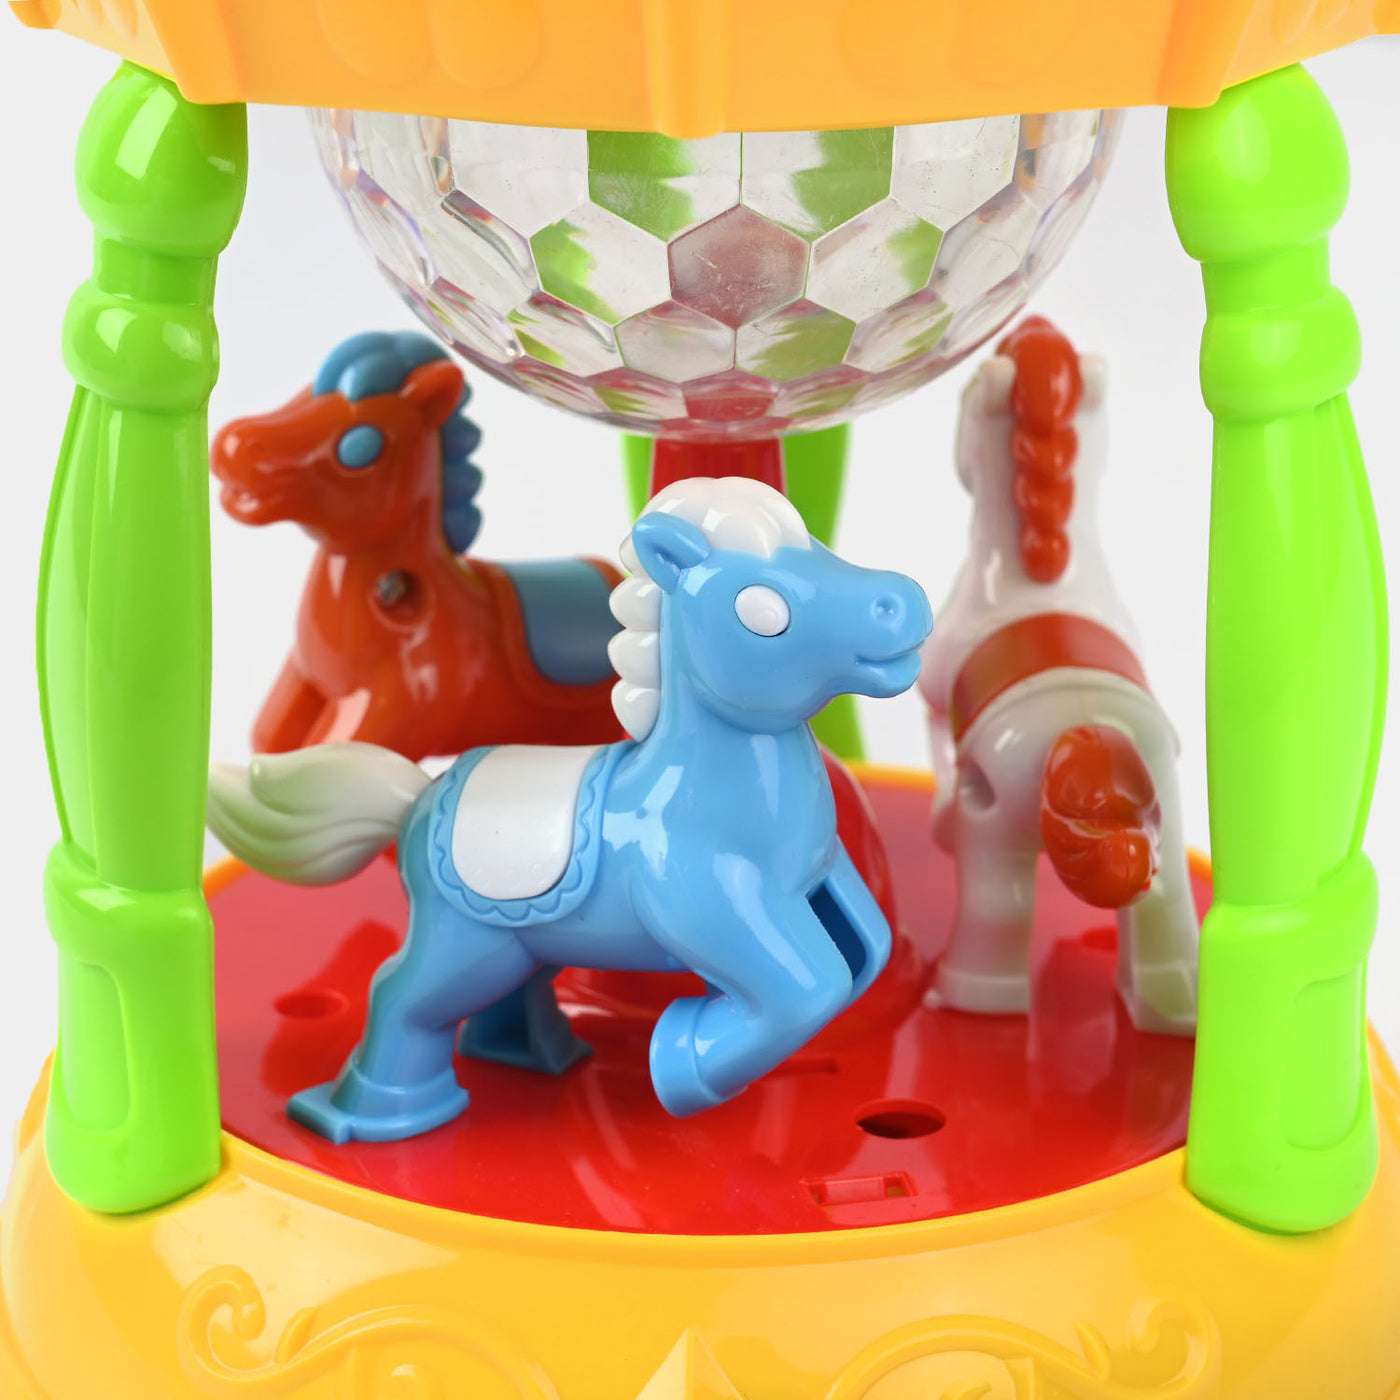 Carousel With Light & music For Kids